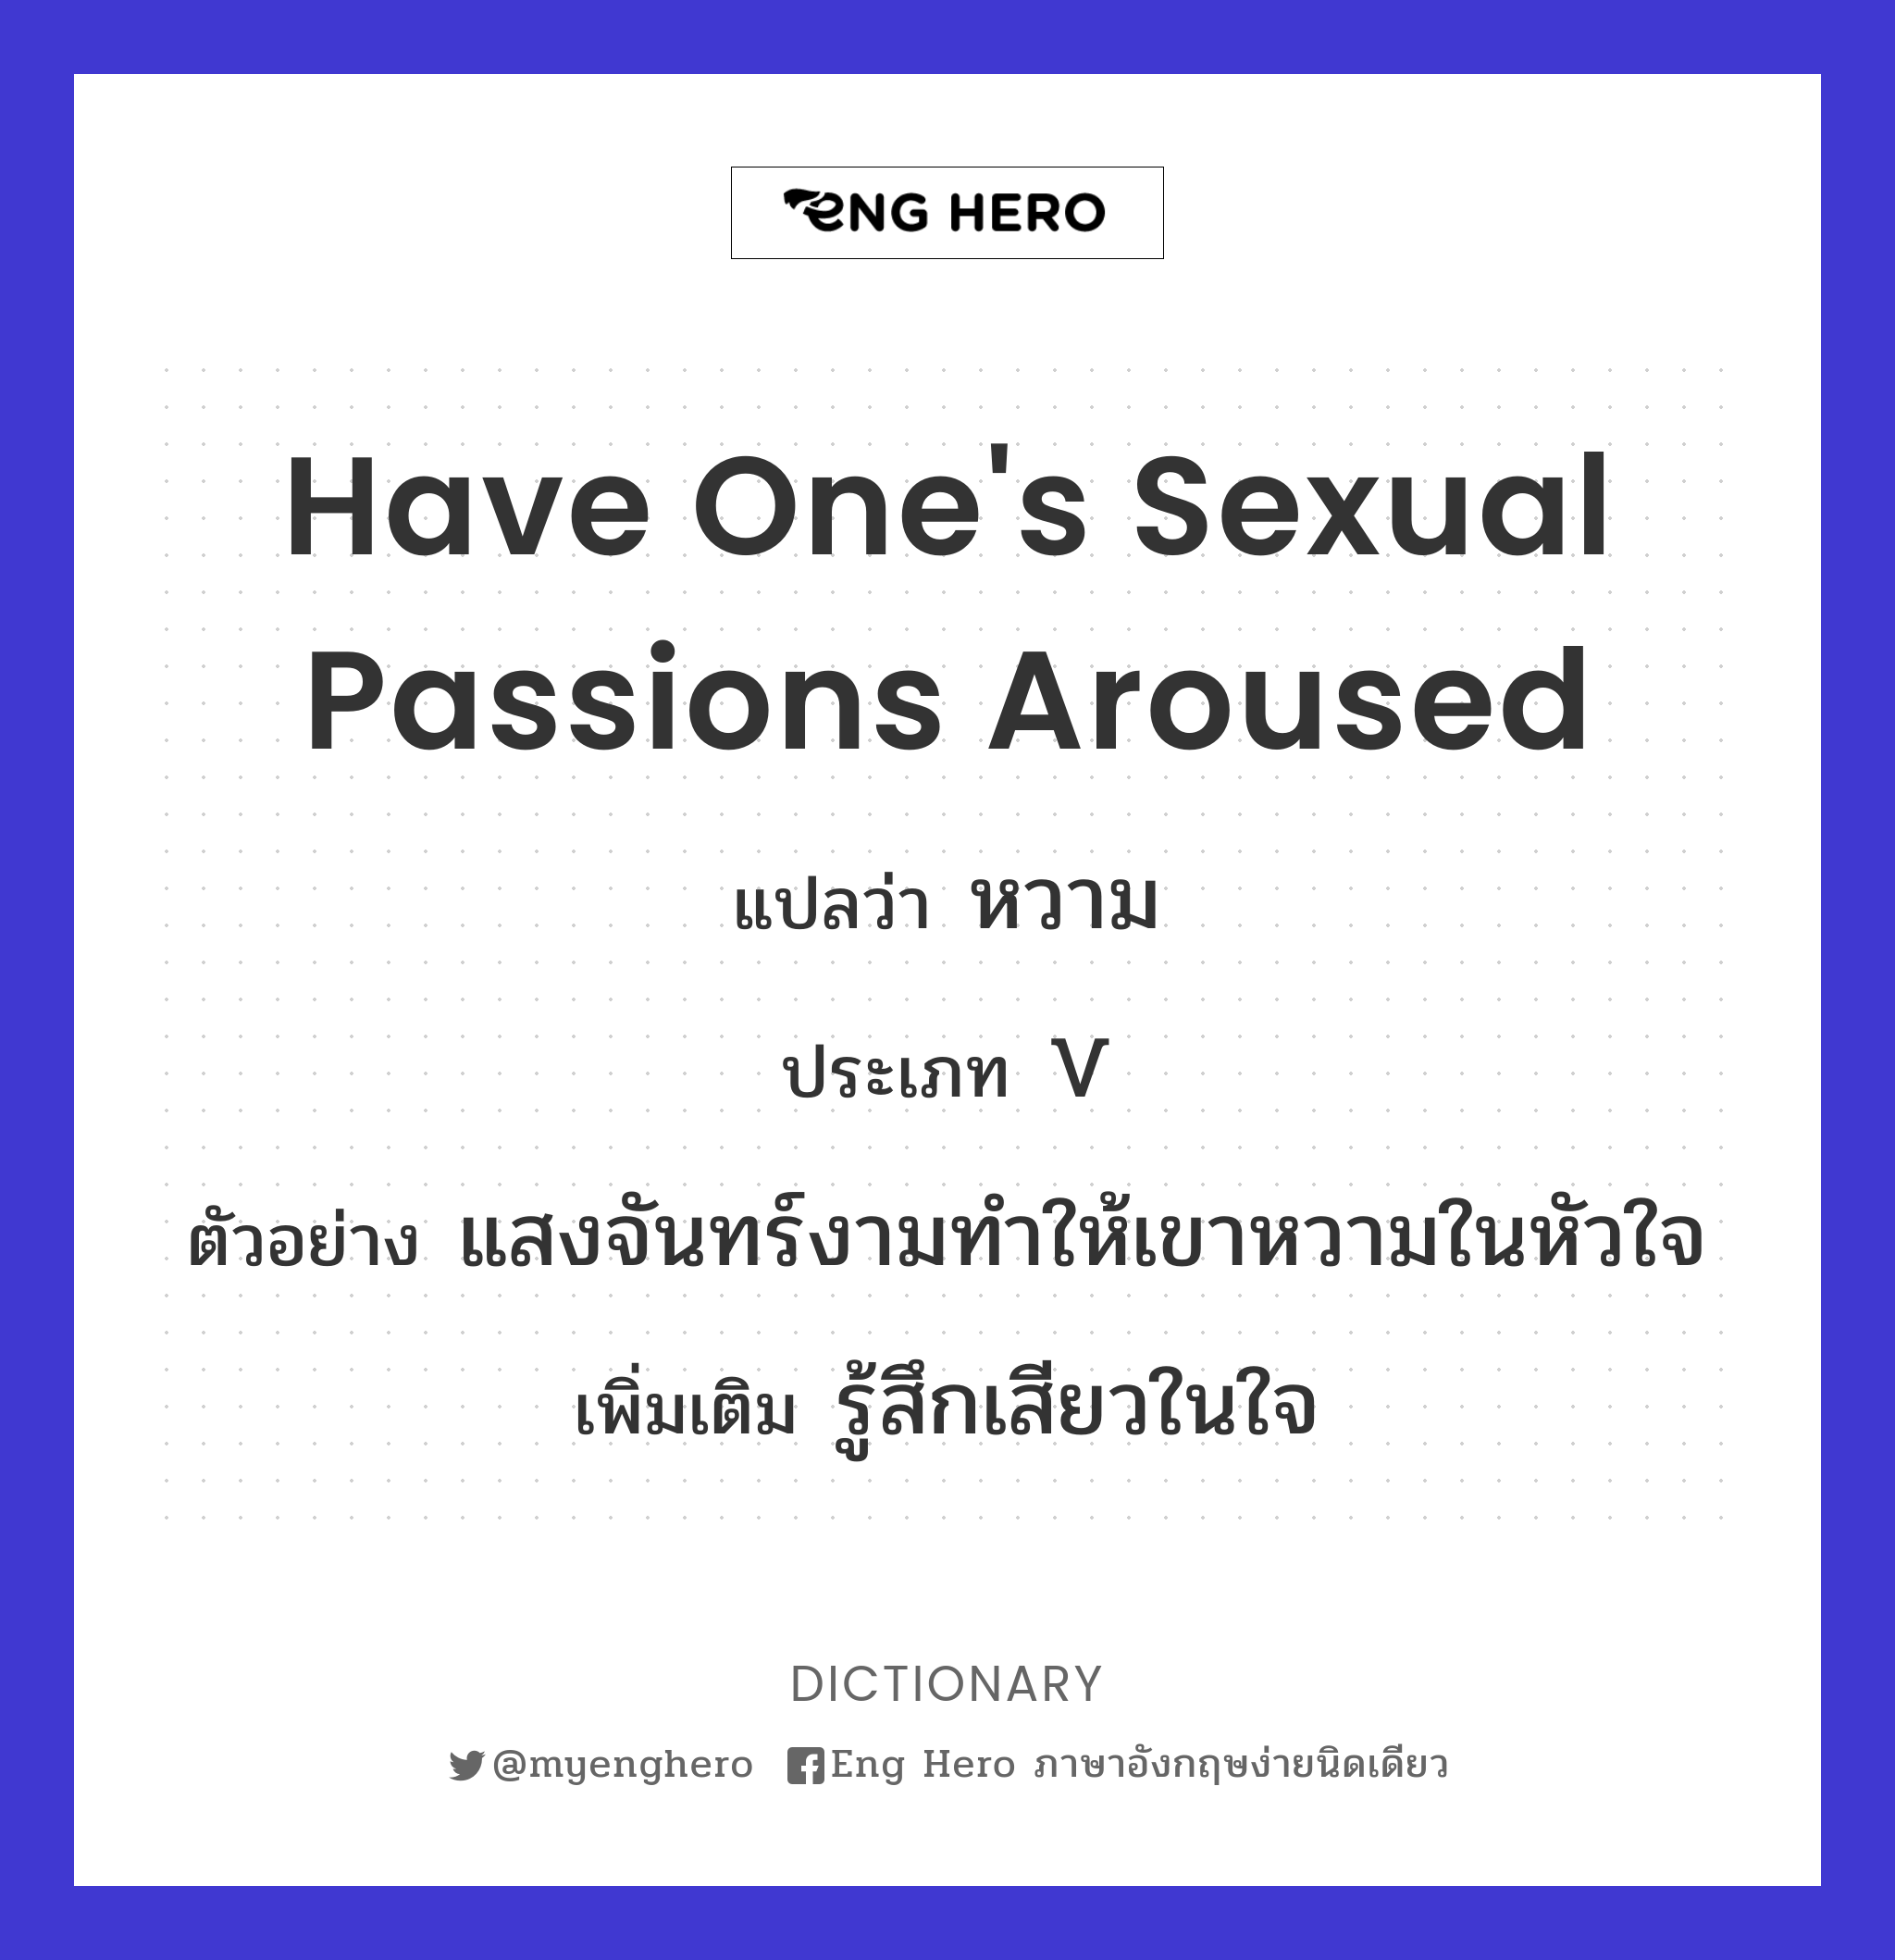 have one's sexual passions aroused